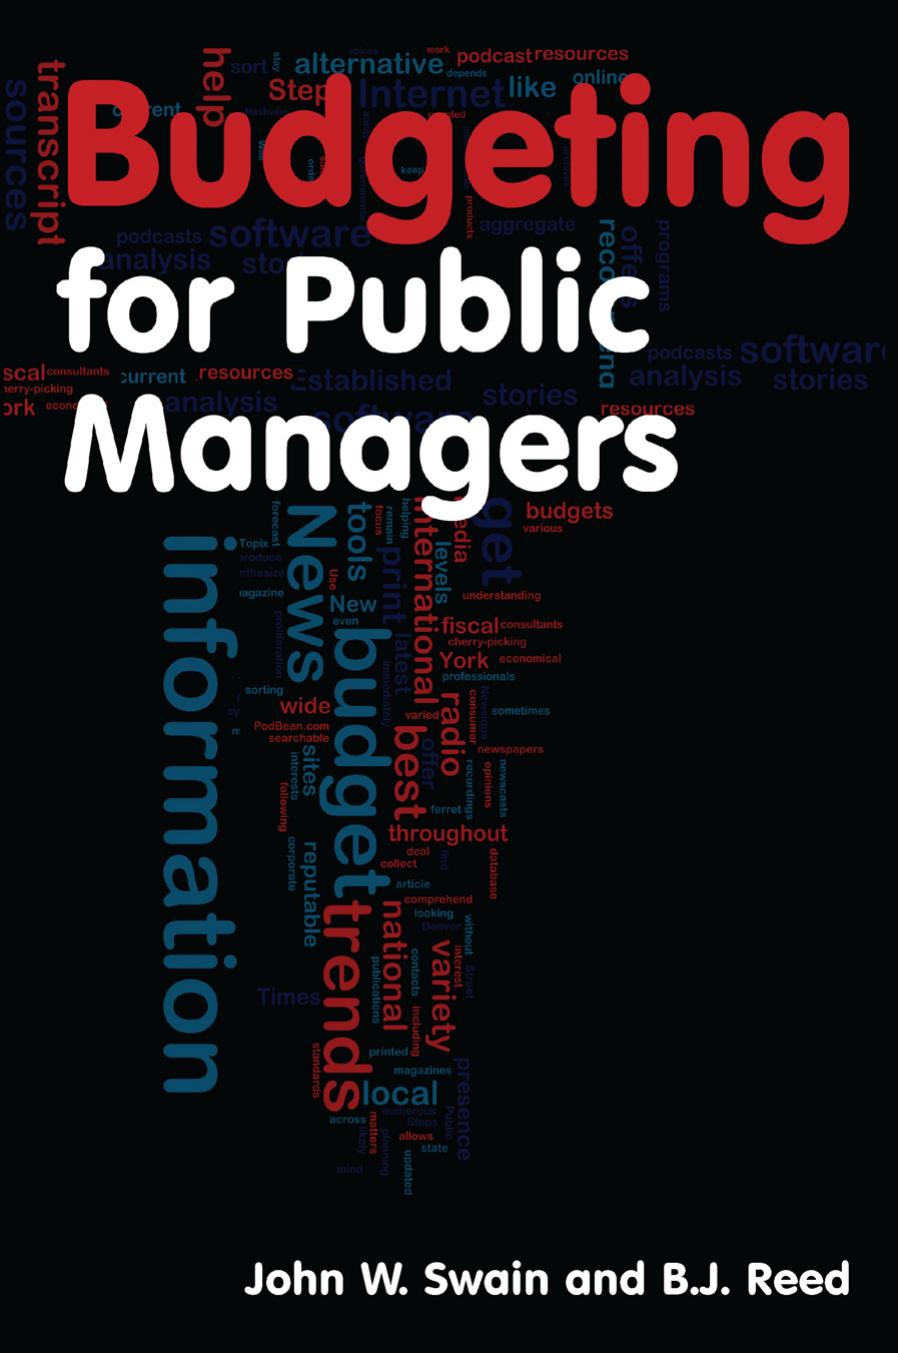 Budgeting for Public Managers  by Swain, John W.,Reed, B. J_